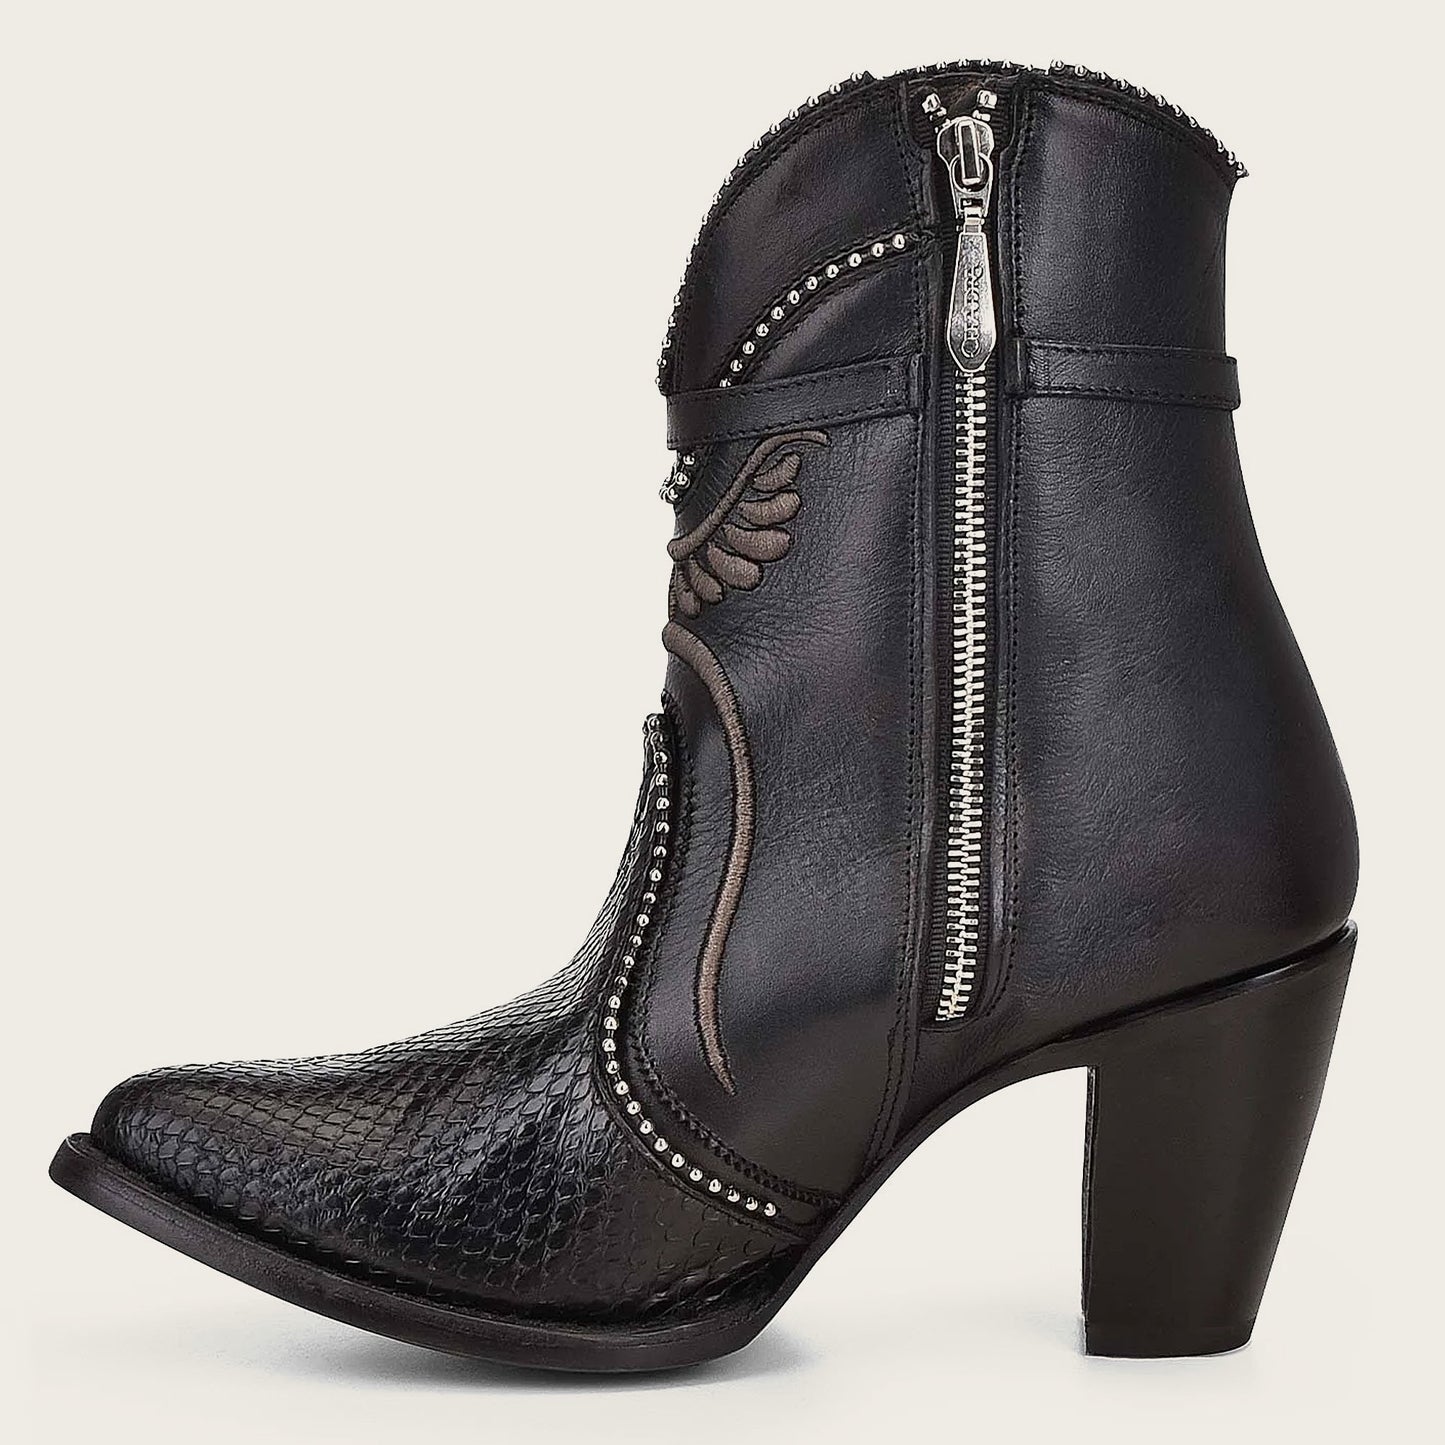 These boots combine style and practicality with a leather strap, metallic buckle, and inner zipper for easy on-and-off